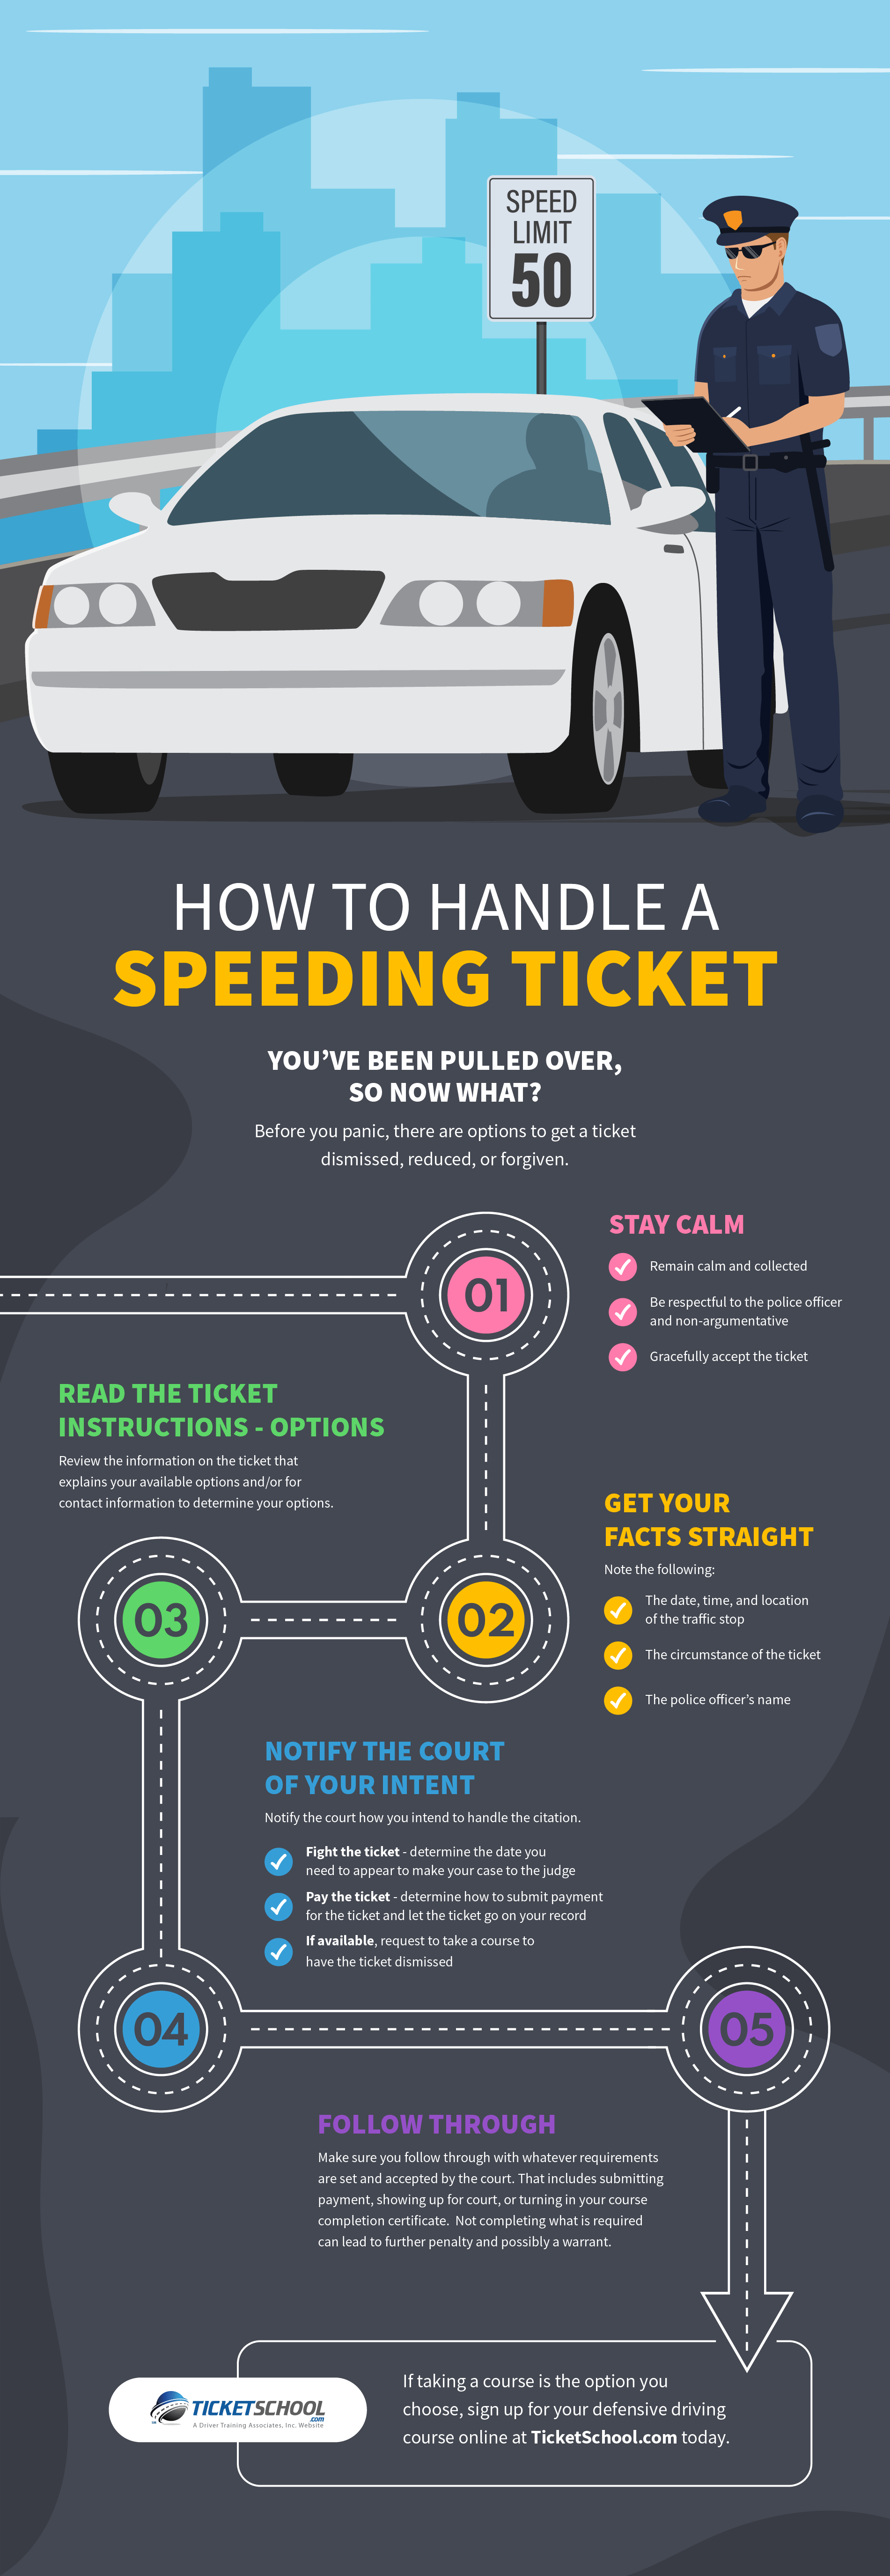 How to Handle a Speeding Ticket Infographic